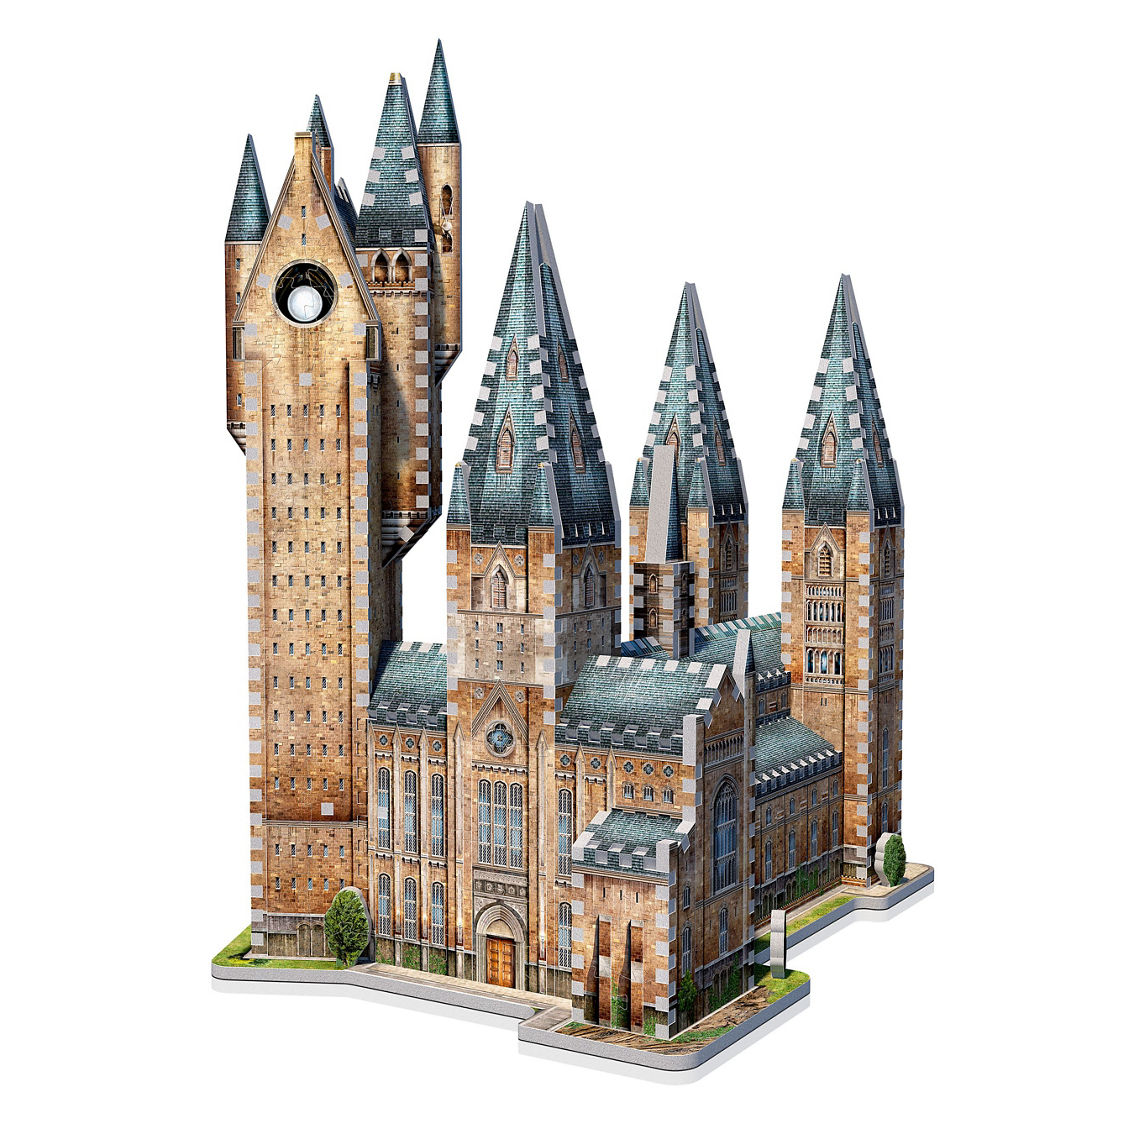 Wrebbit Harry Potter Hogwarts Castle - 2 3D Puzzles: Great Hall and Astronomy Tower - Image 3 of 5